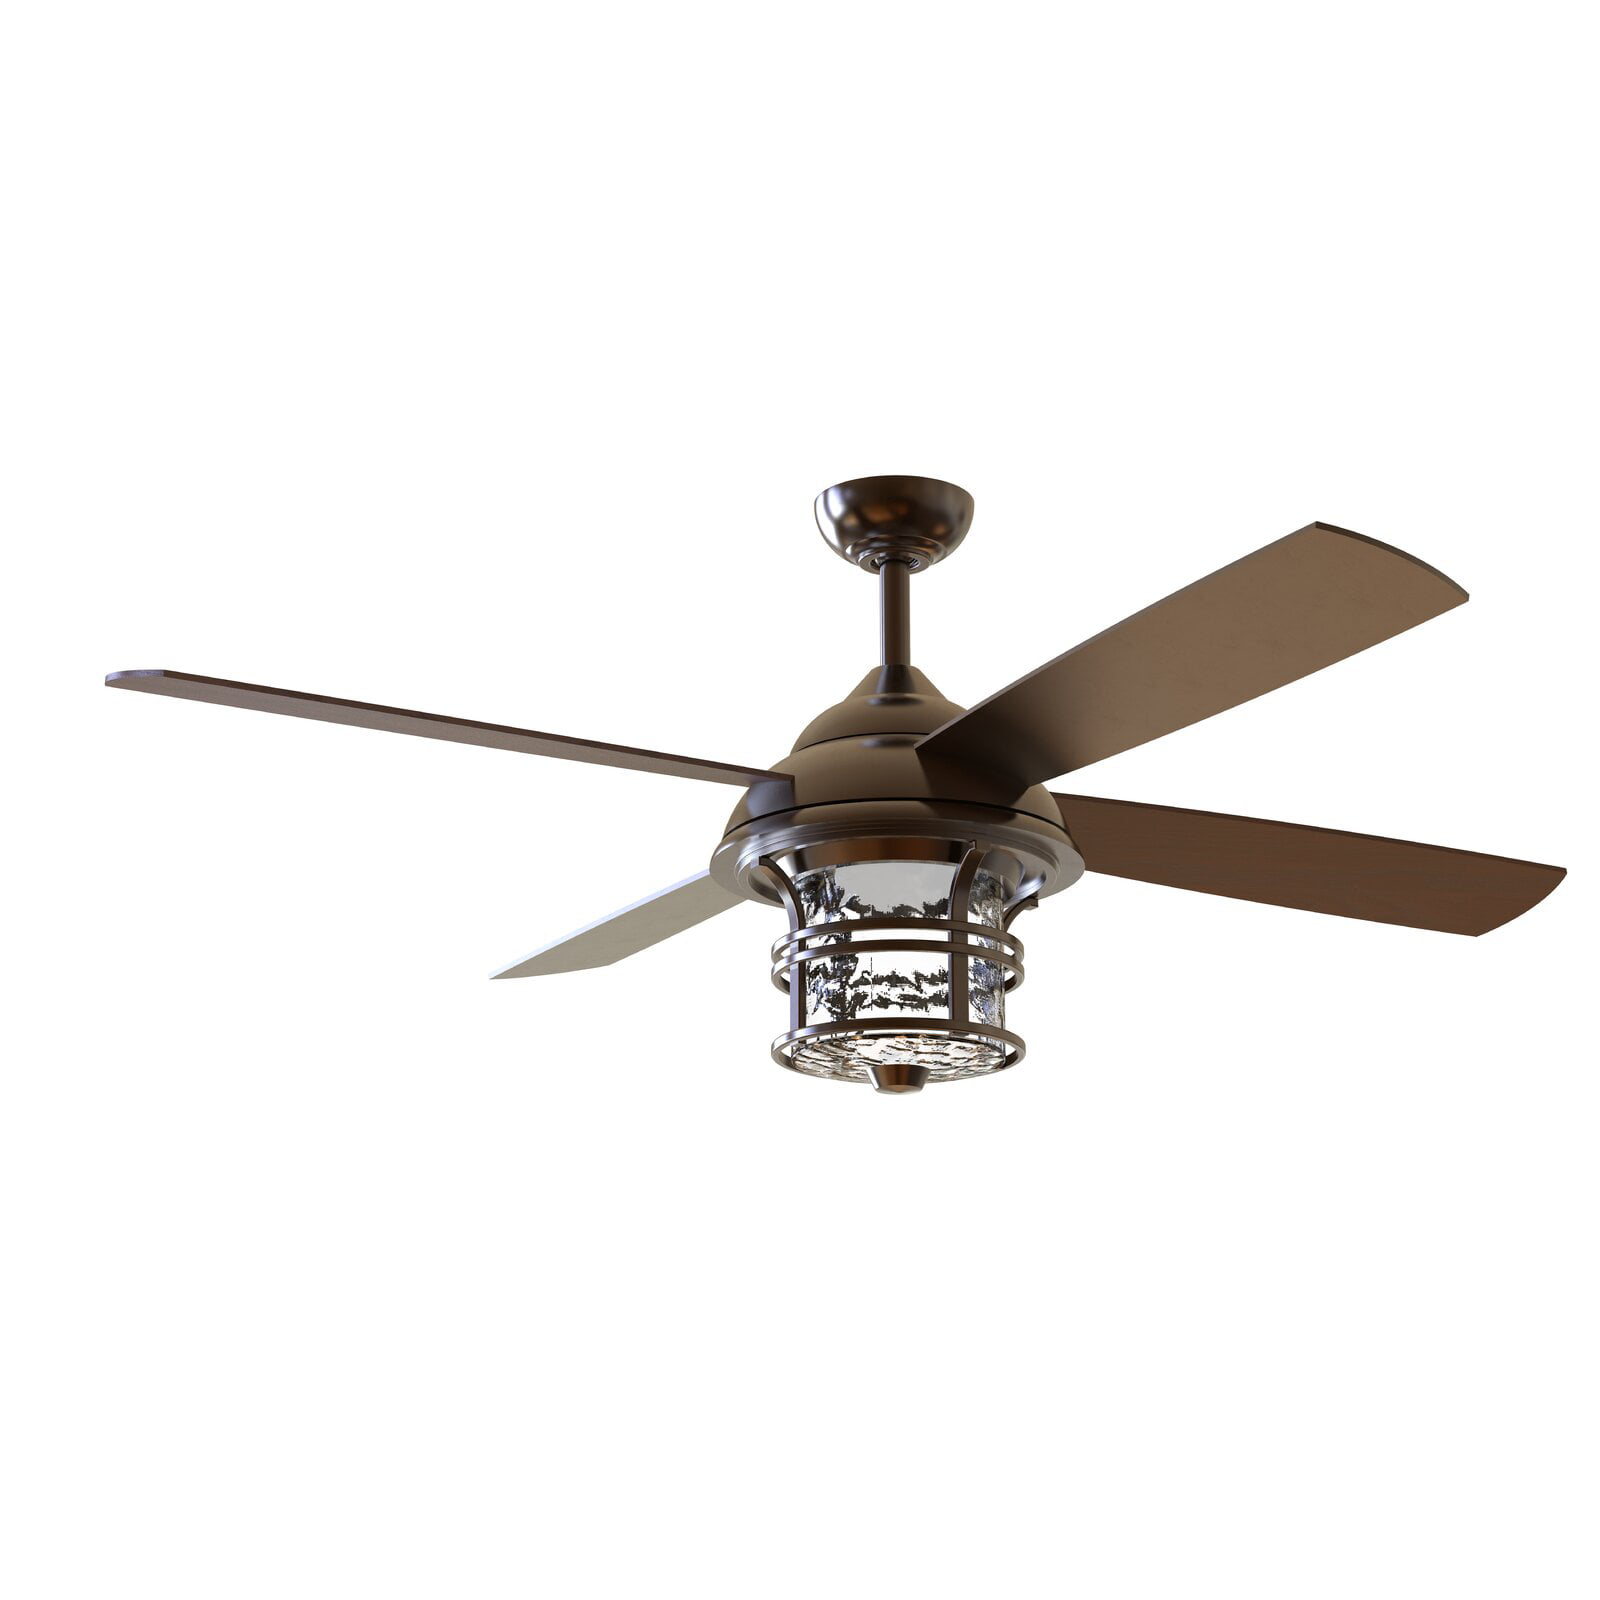 CEILING FAN BLADE REPLACEMENT WHITE WITH WICKER 16 3/4" x 5 1/2" 